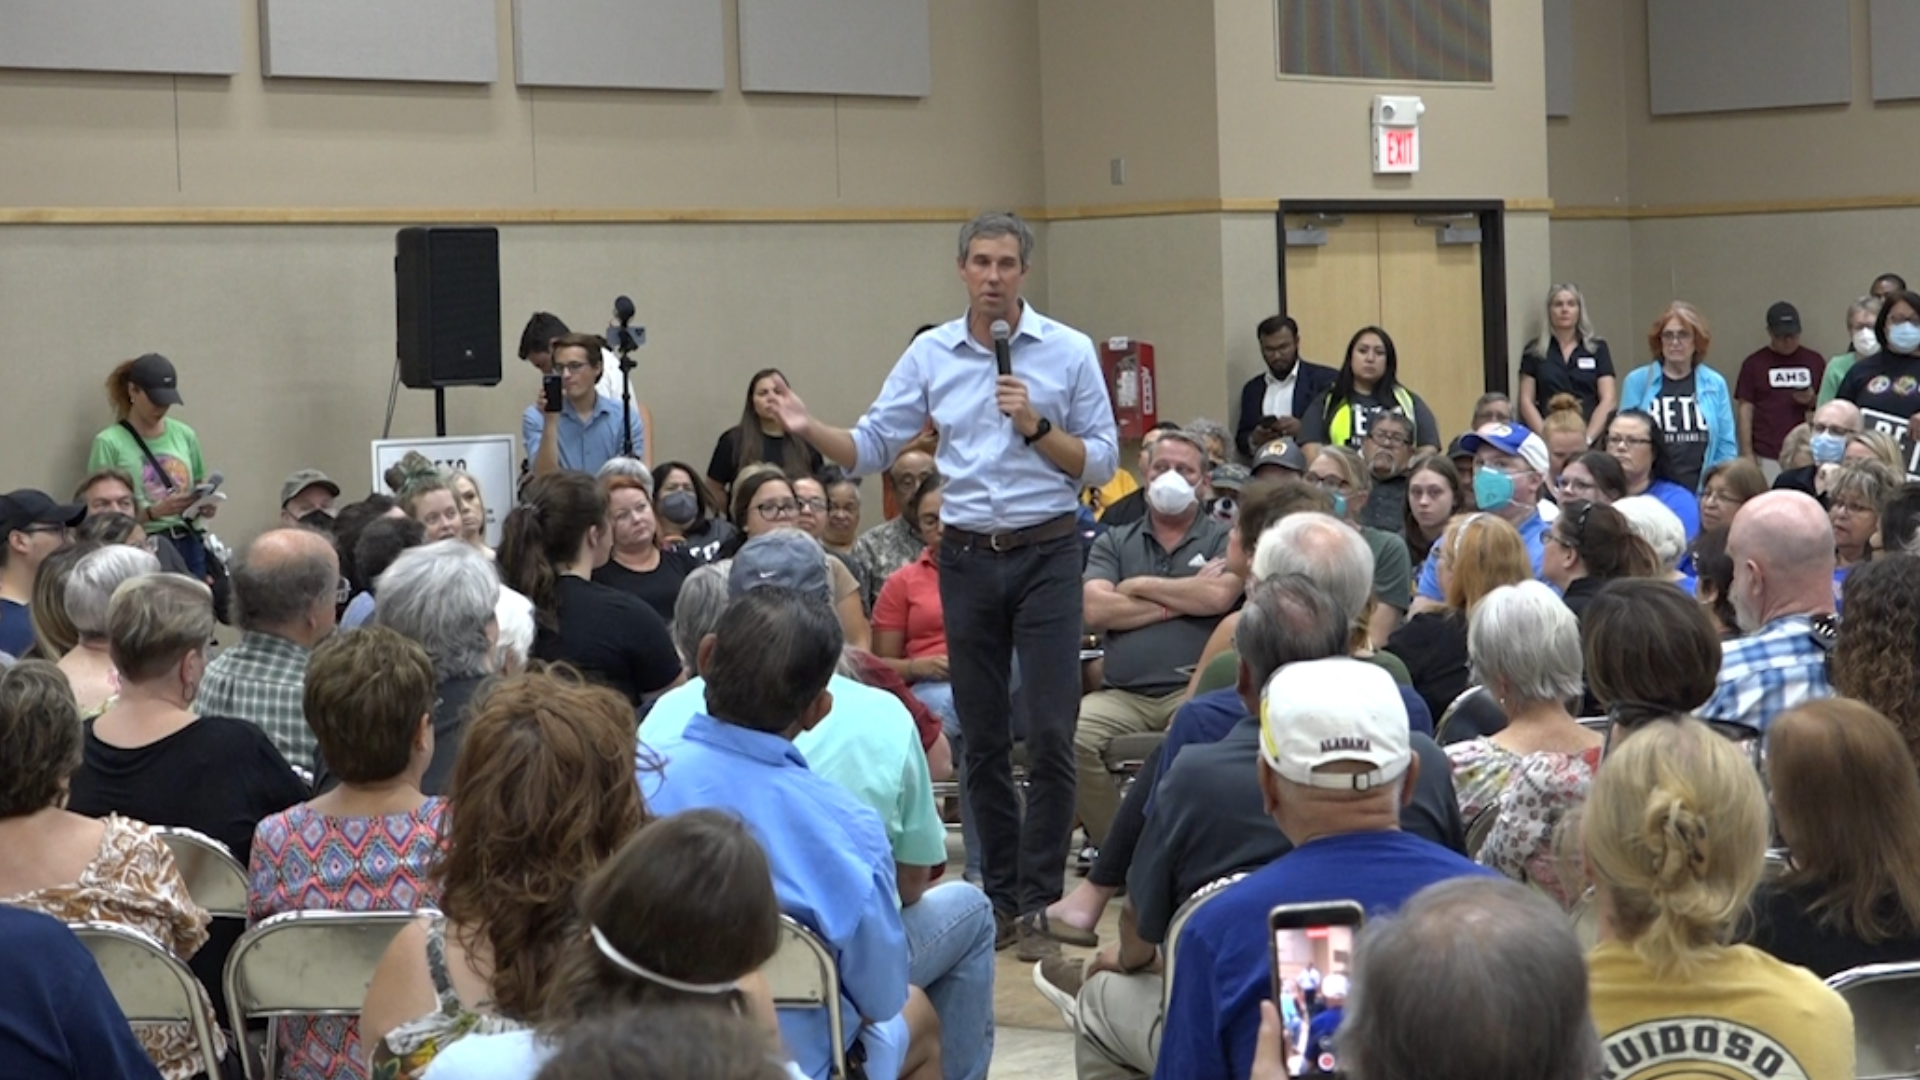 O'Rourke has been traveling across the state to promote his book "We've Got to Try" and will be in Abilene on May 5th.